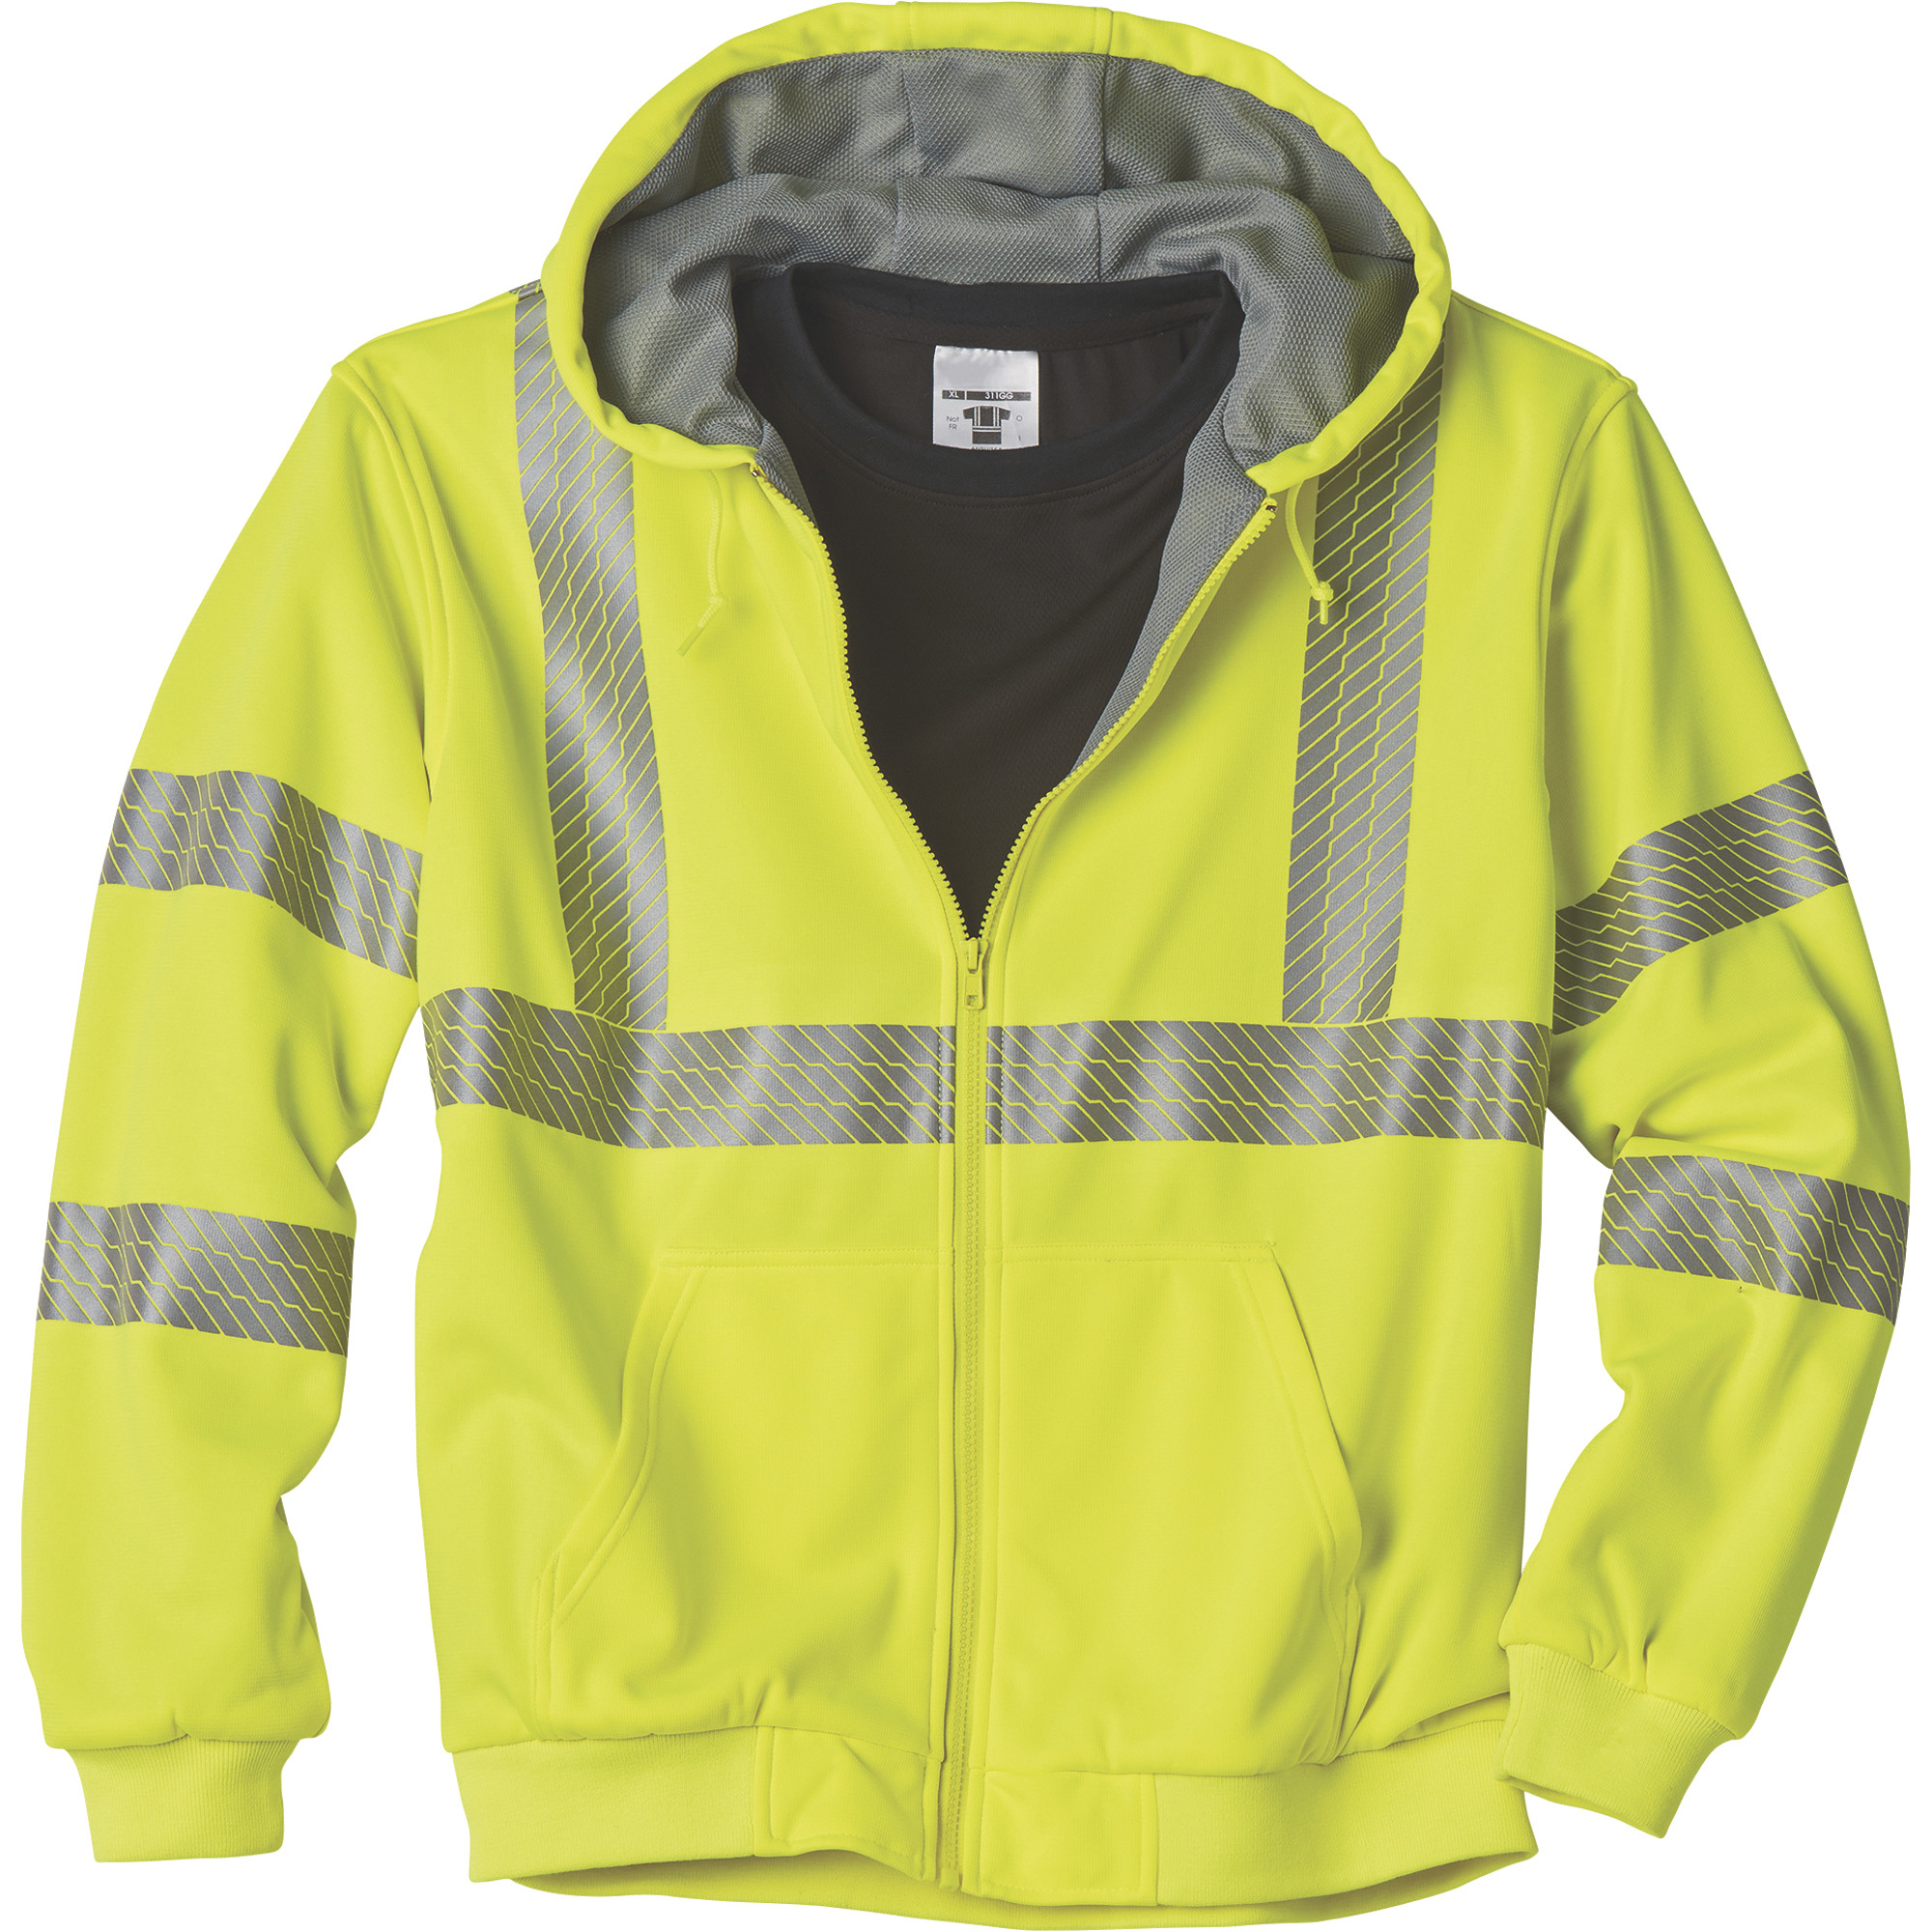 Tough Duck Safety Men's Class 3 High Visibility Thermal-Lined Hoodie â Lime, Large